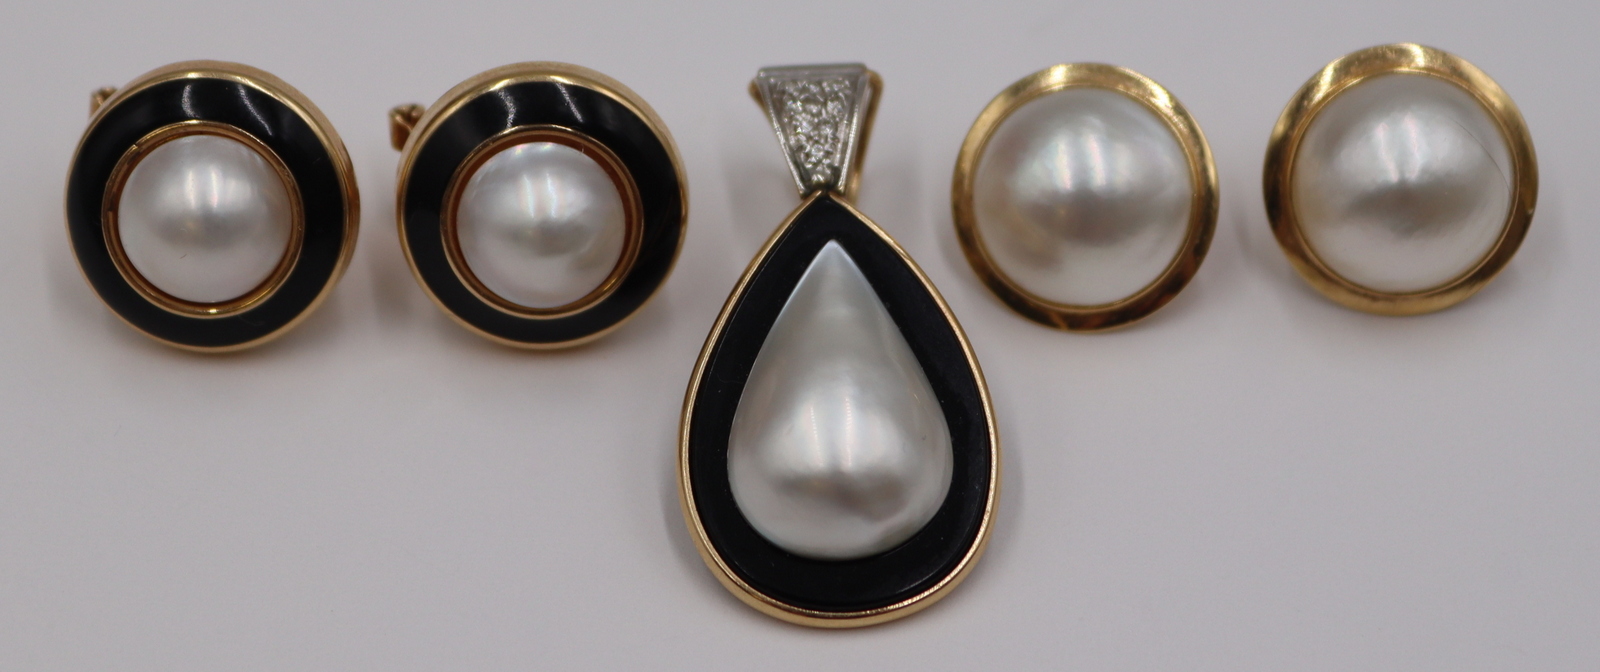 JEWELRY 14KT GOLD MABE PEARL 3bdf38